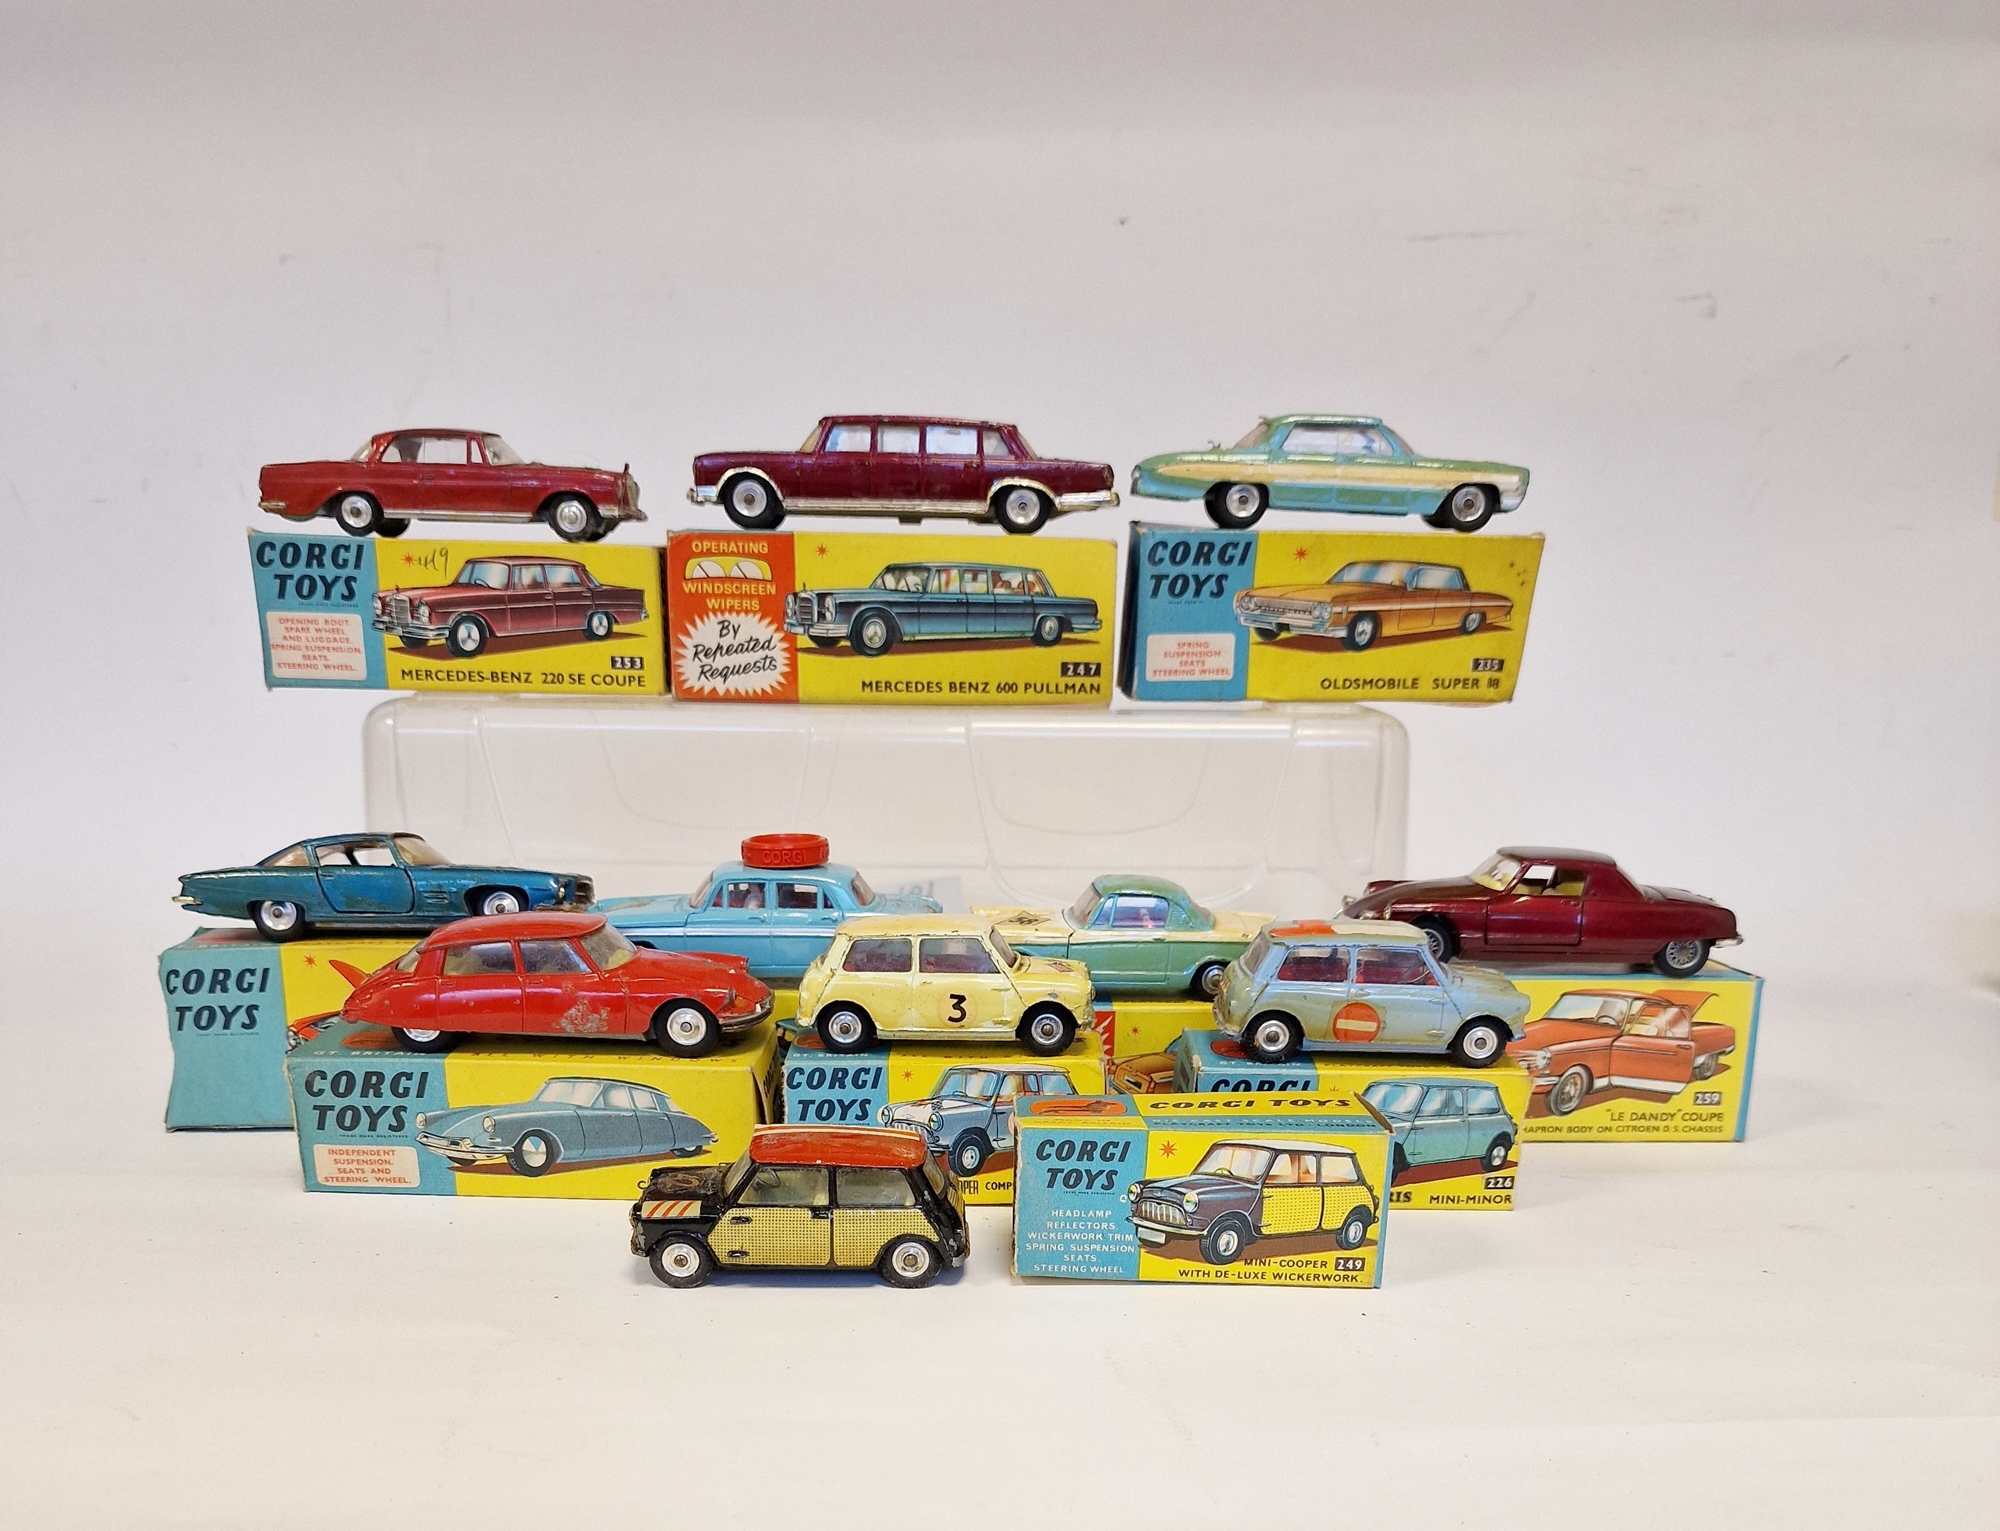 Quantity of playworn Corgi Toys with boxes (flap cut) to include 247 Mercedes Benz 600 Pulman, 253